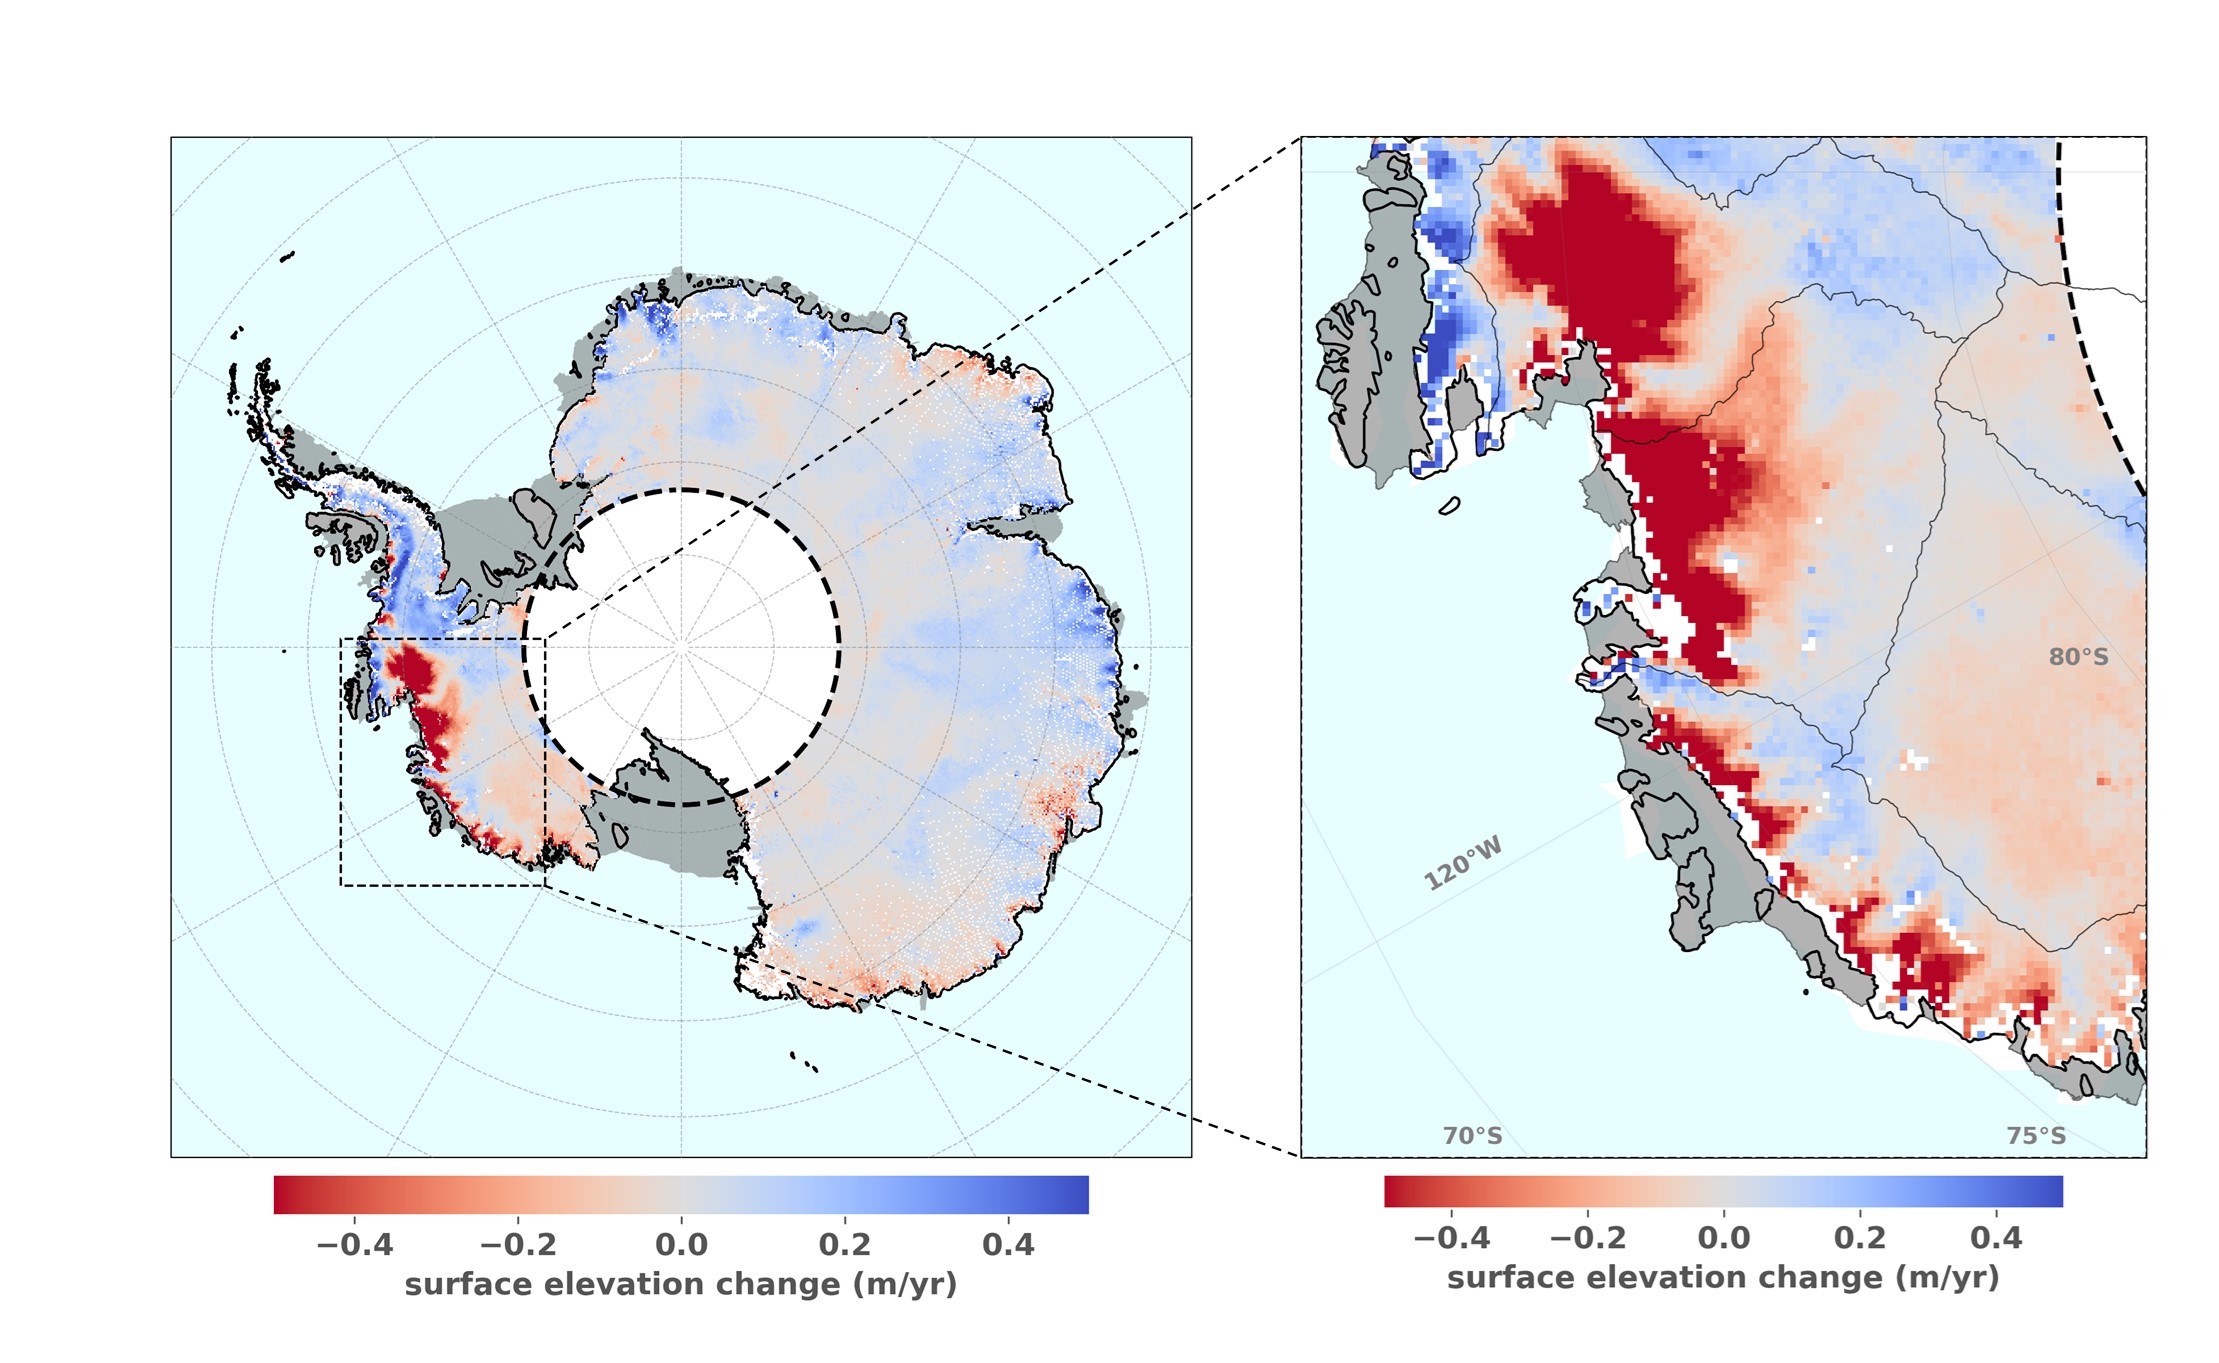 Surface elevation change over the Antarctic ice sheet during the 2019-2022 period